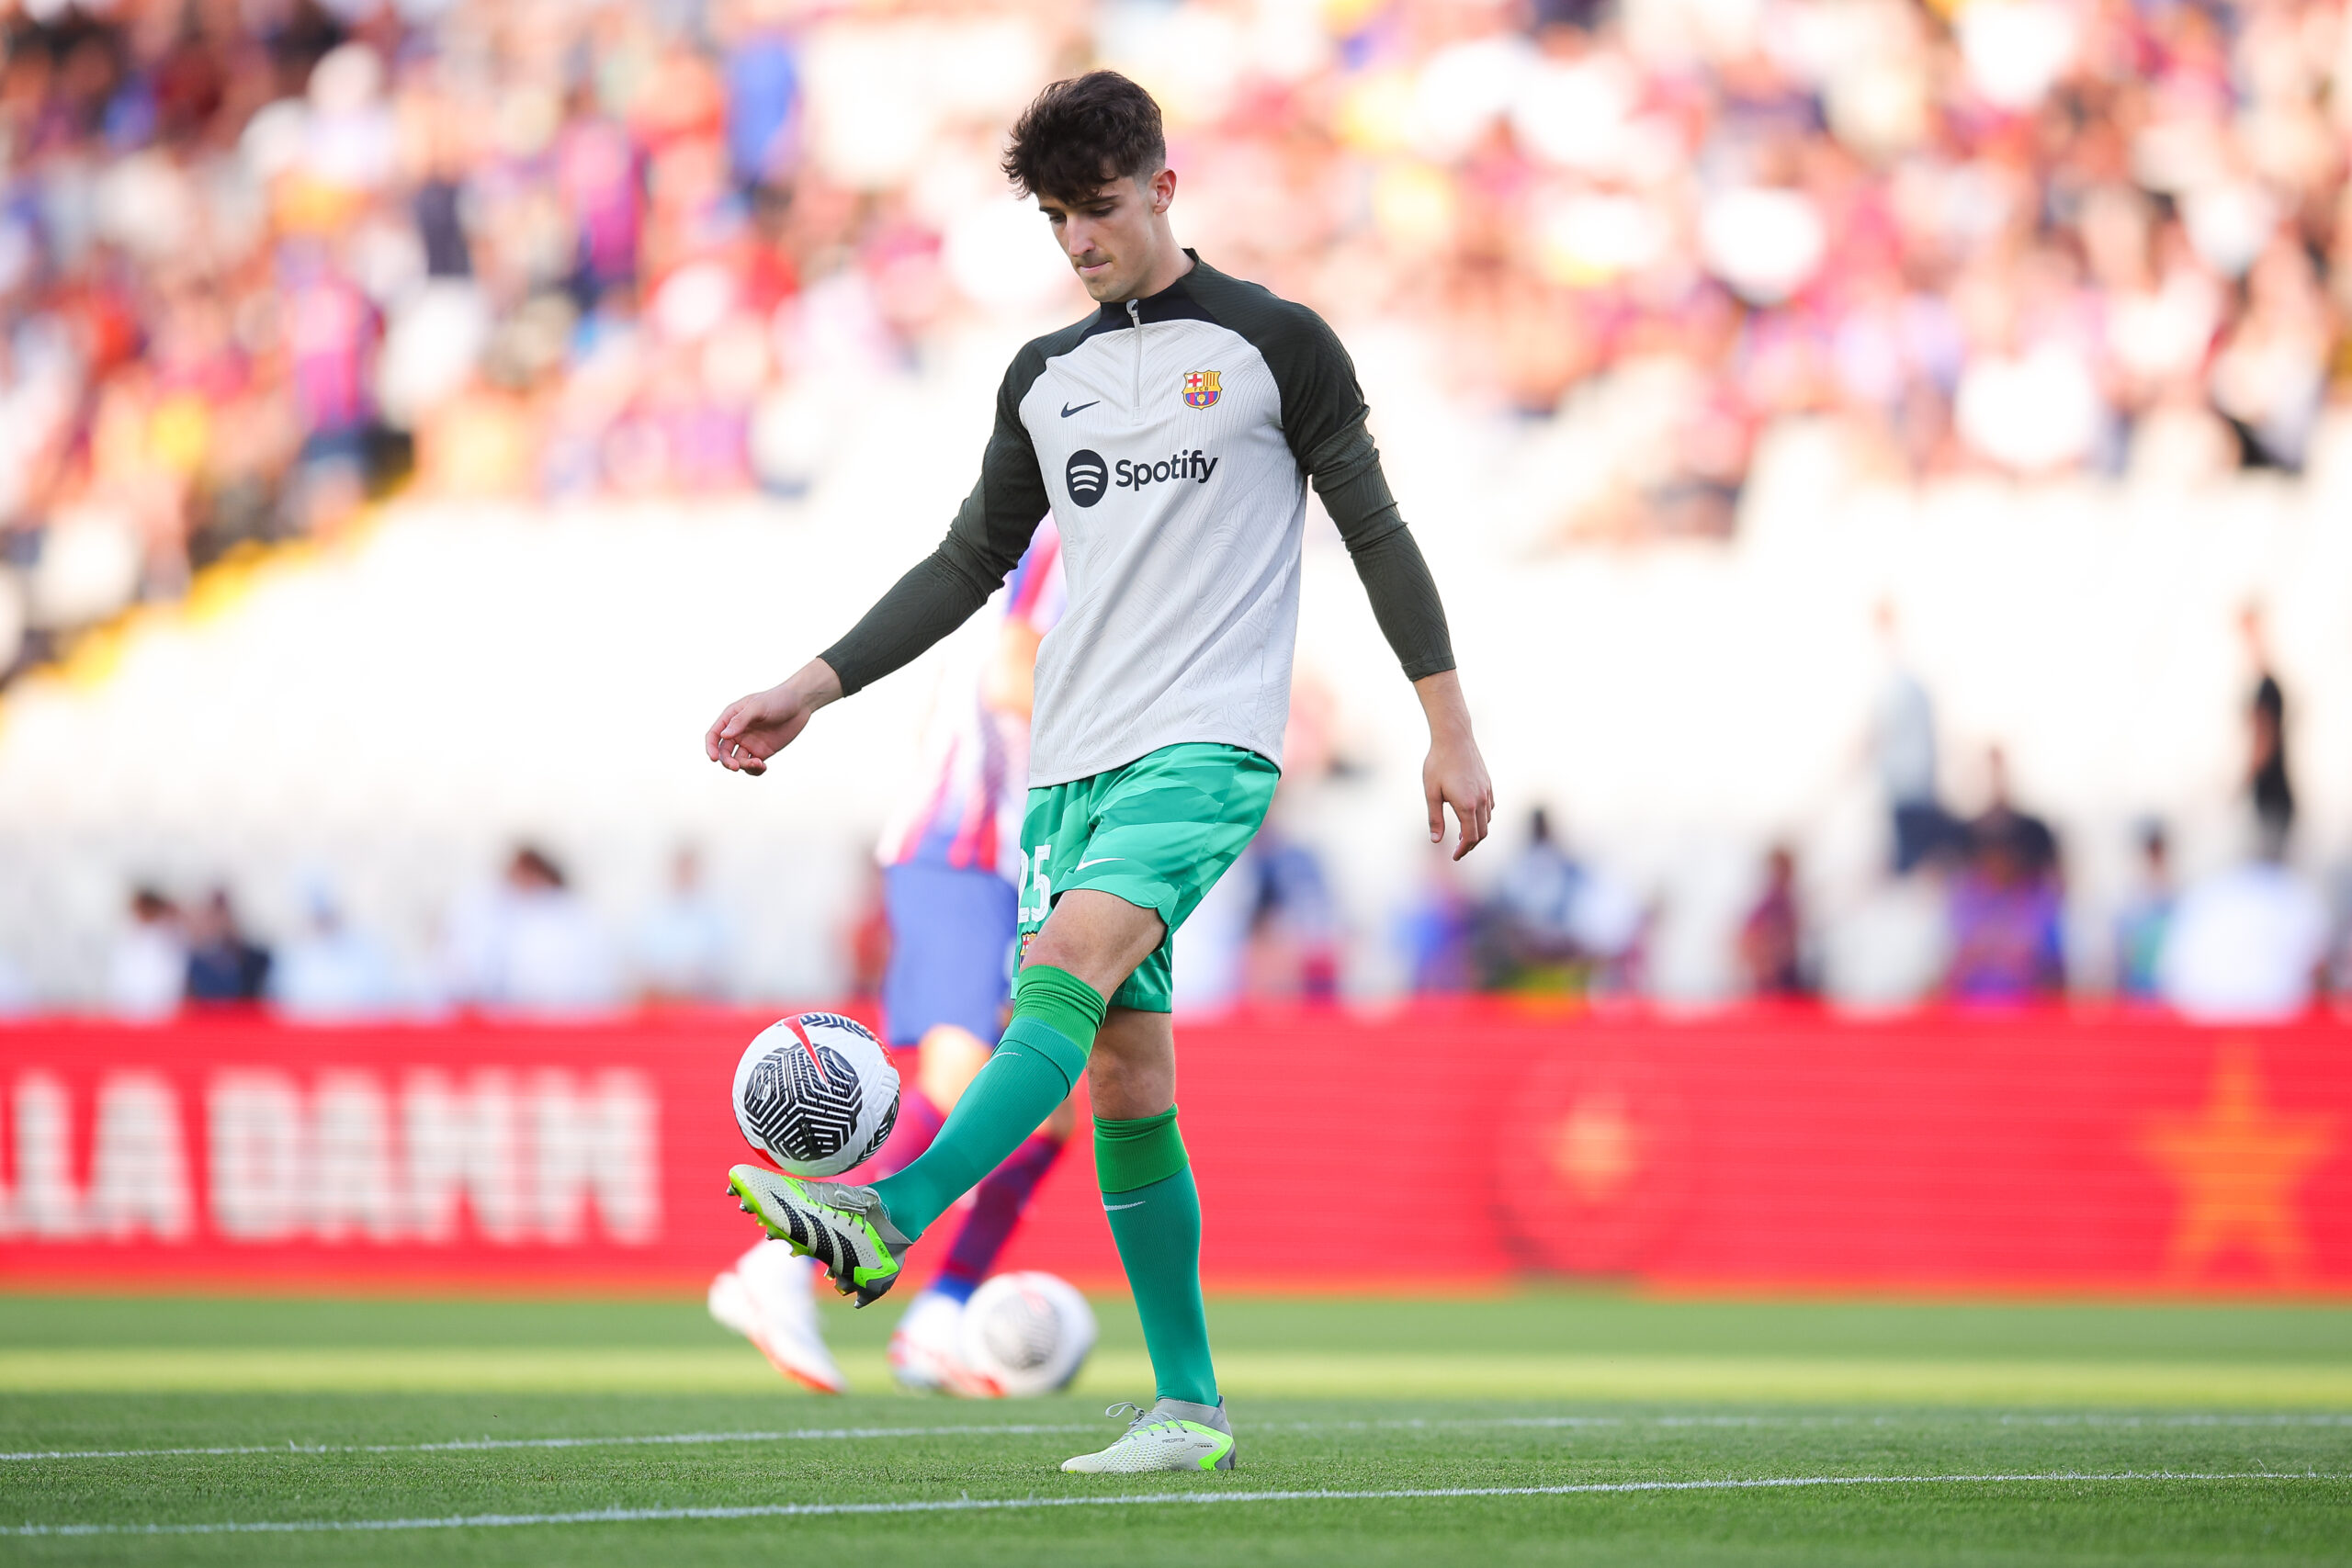 BARCELONA, SPAIN - AUGUST 08: Ander Astralaga of FC Barcelona warm up prior to the Joan Gamper Trophy match between FC Barcelona and Tottenham Hotspur at Estadi Olimpic Lluis Companys on August 08, 2023 in Barcelona, Spain.